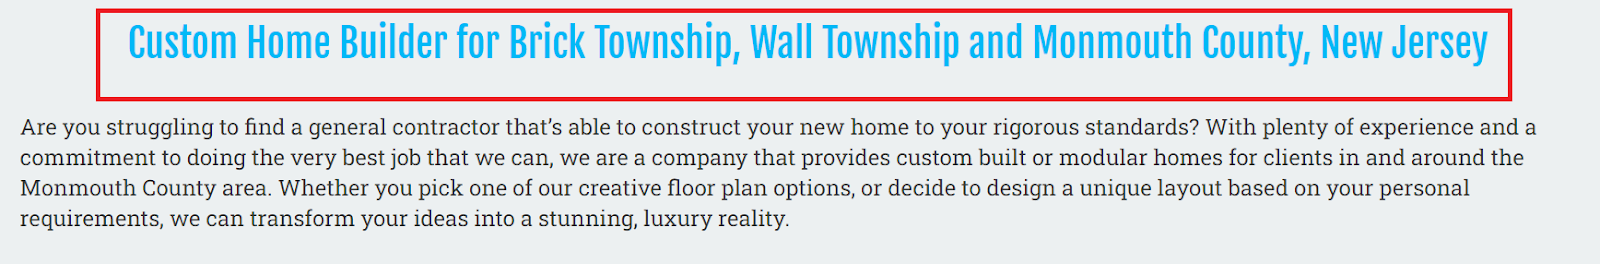 Landing page for a custom home builder for Brick Township, Wall Township and Monmouth County, New Jersey